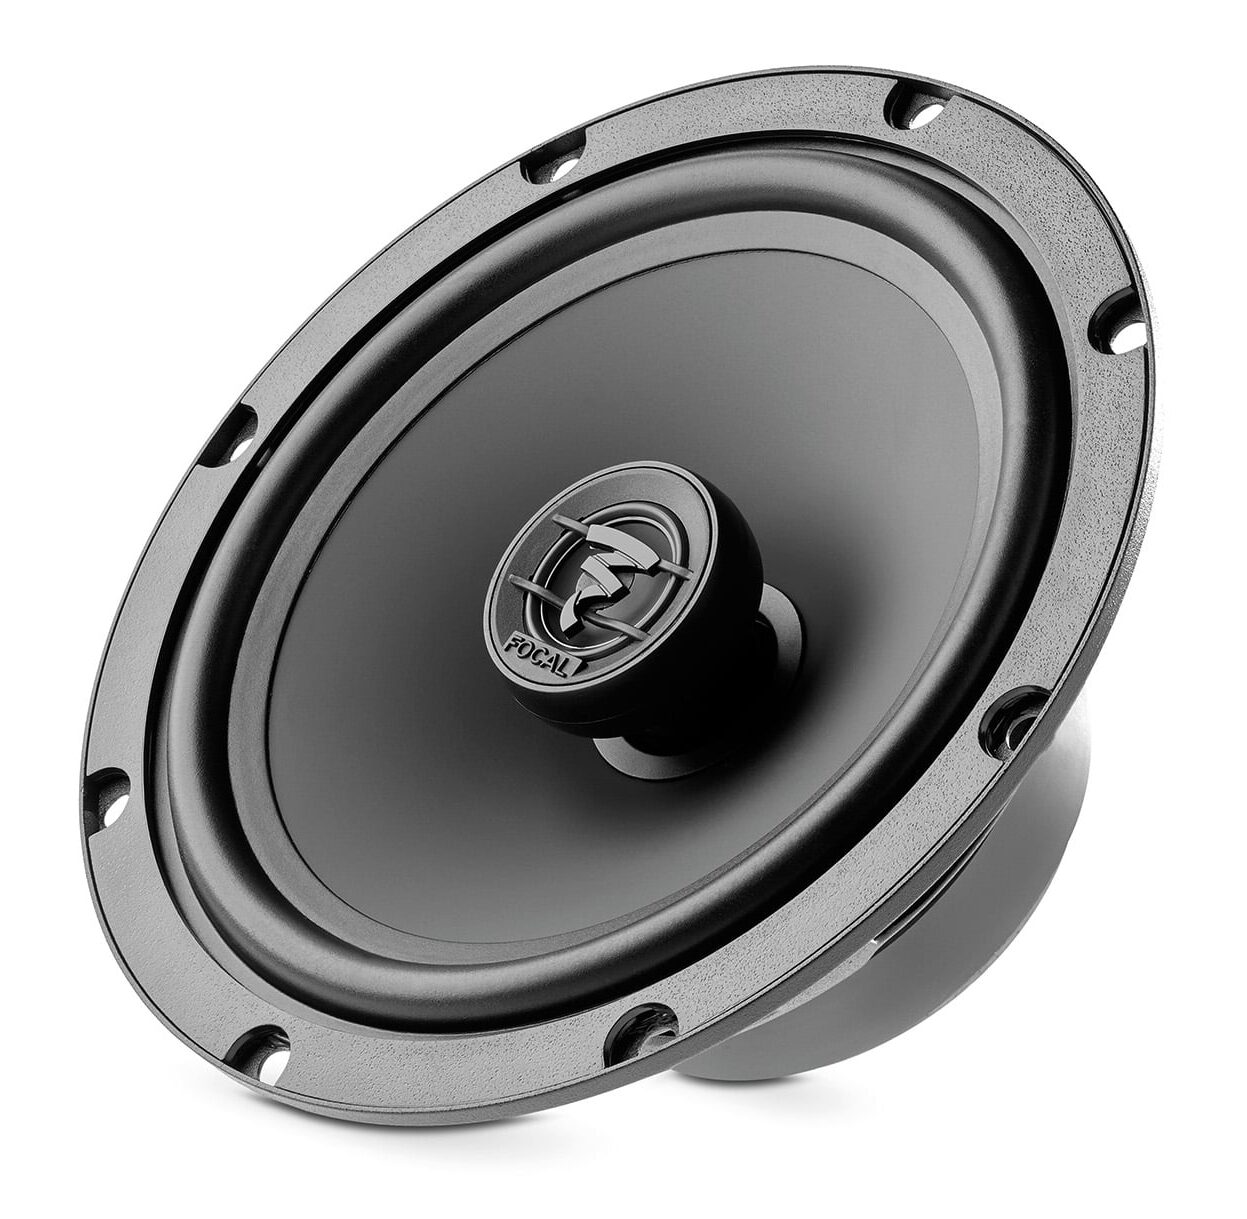 Zwijgend Portier Schuur Focal America - Manufacturer of high quality car audio products - Coaxial /  component speakers, subwoofers, amplifiers, accessories.